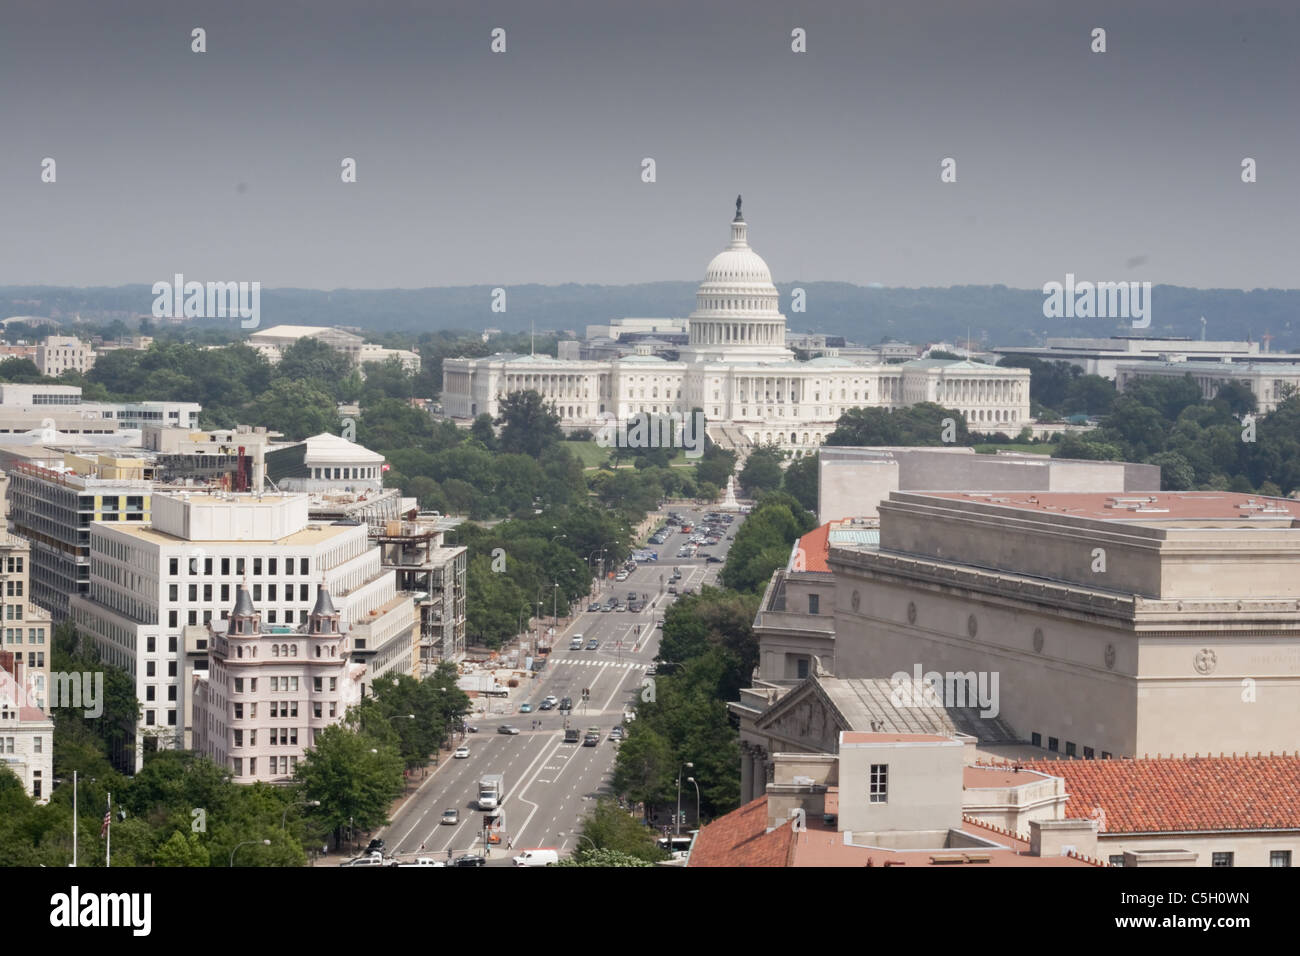 United States Capital Building, Washington DC viewed from the Old Post Office looking down Pennsylvania Ave. Stock Photo